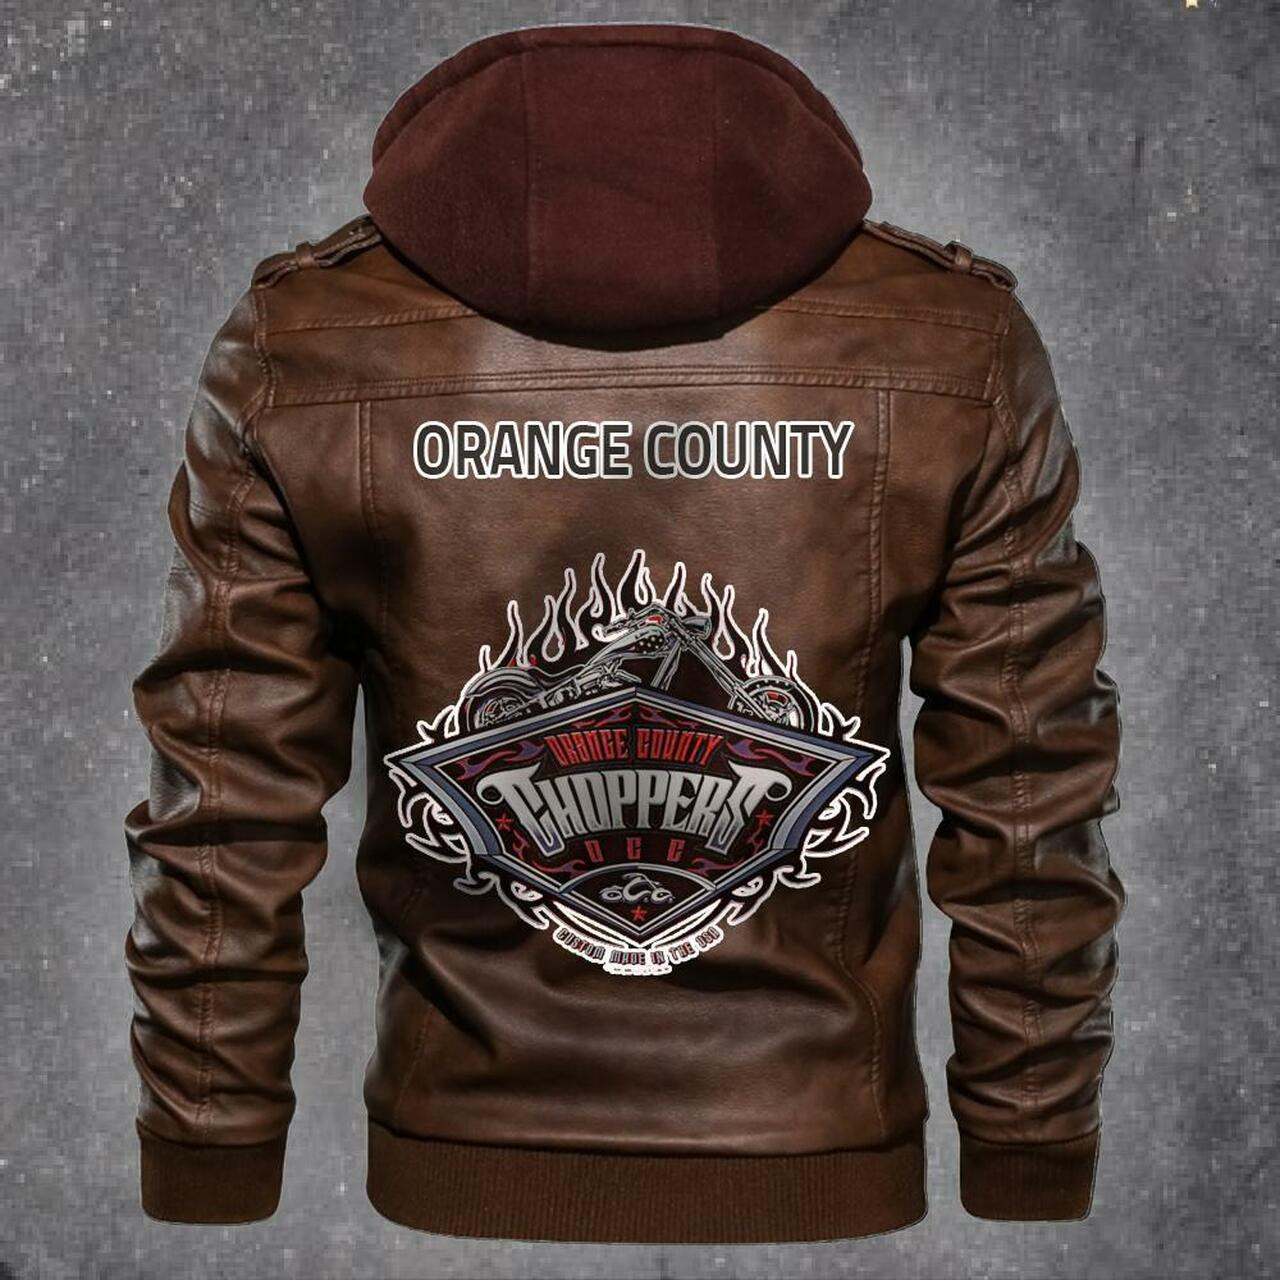 To get a great look, consider purchasing This New Leather Jacket 225